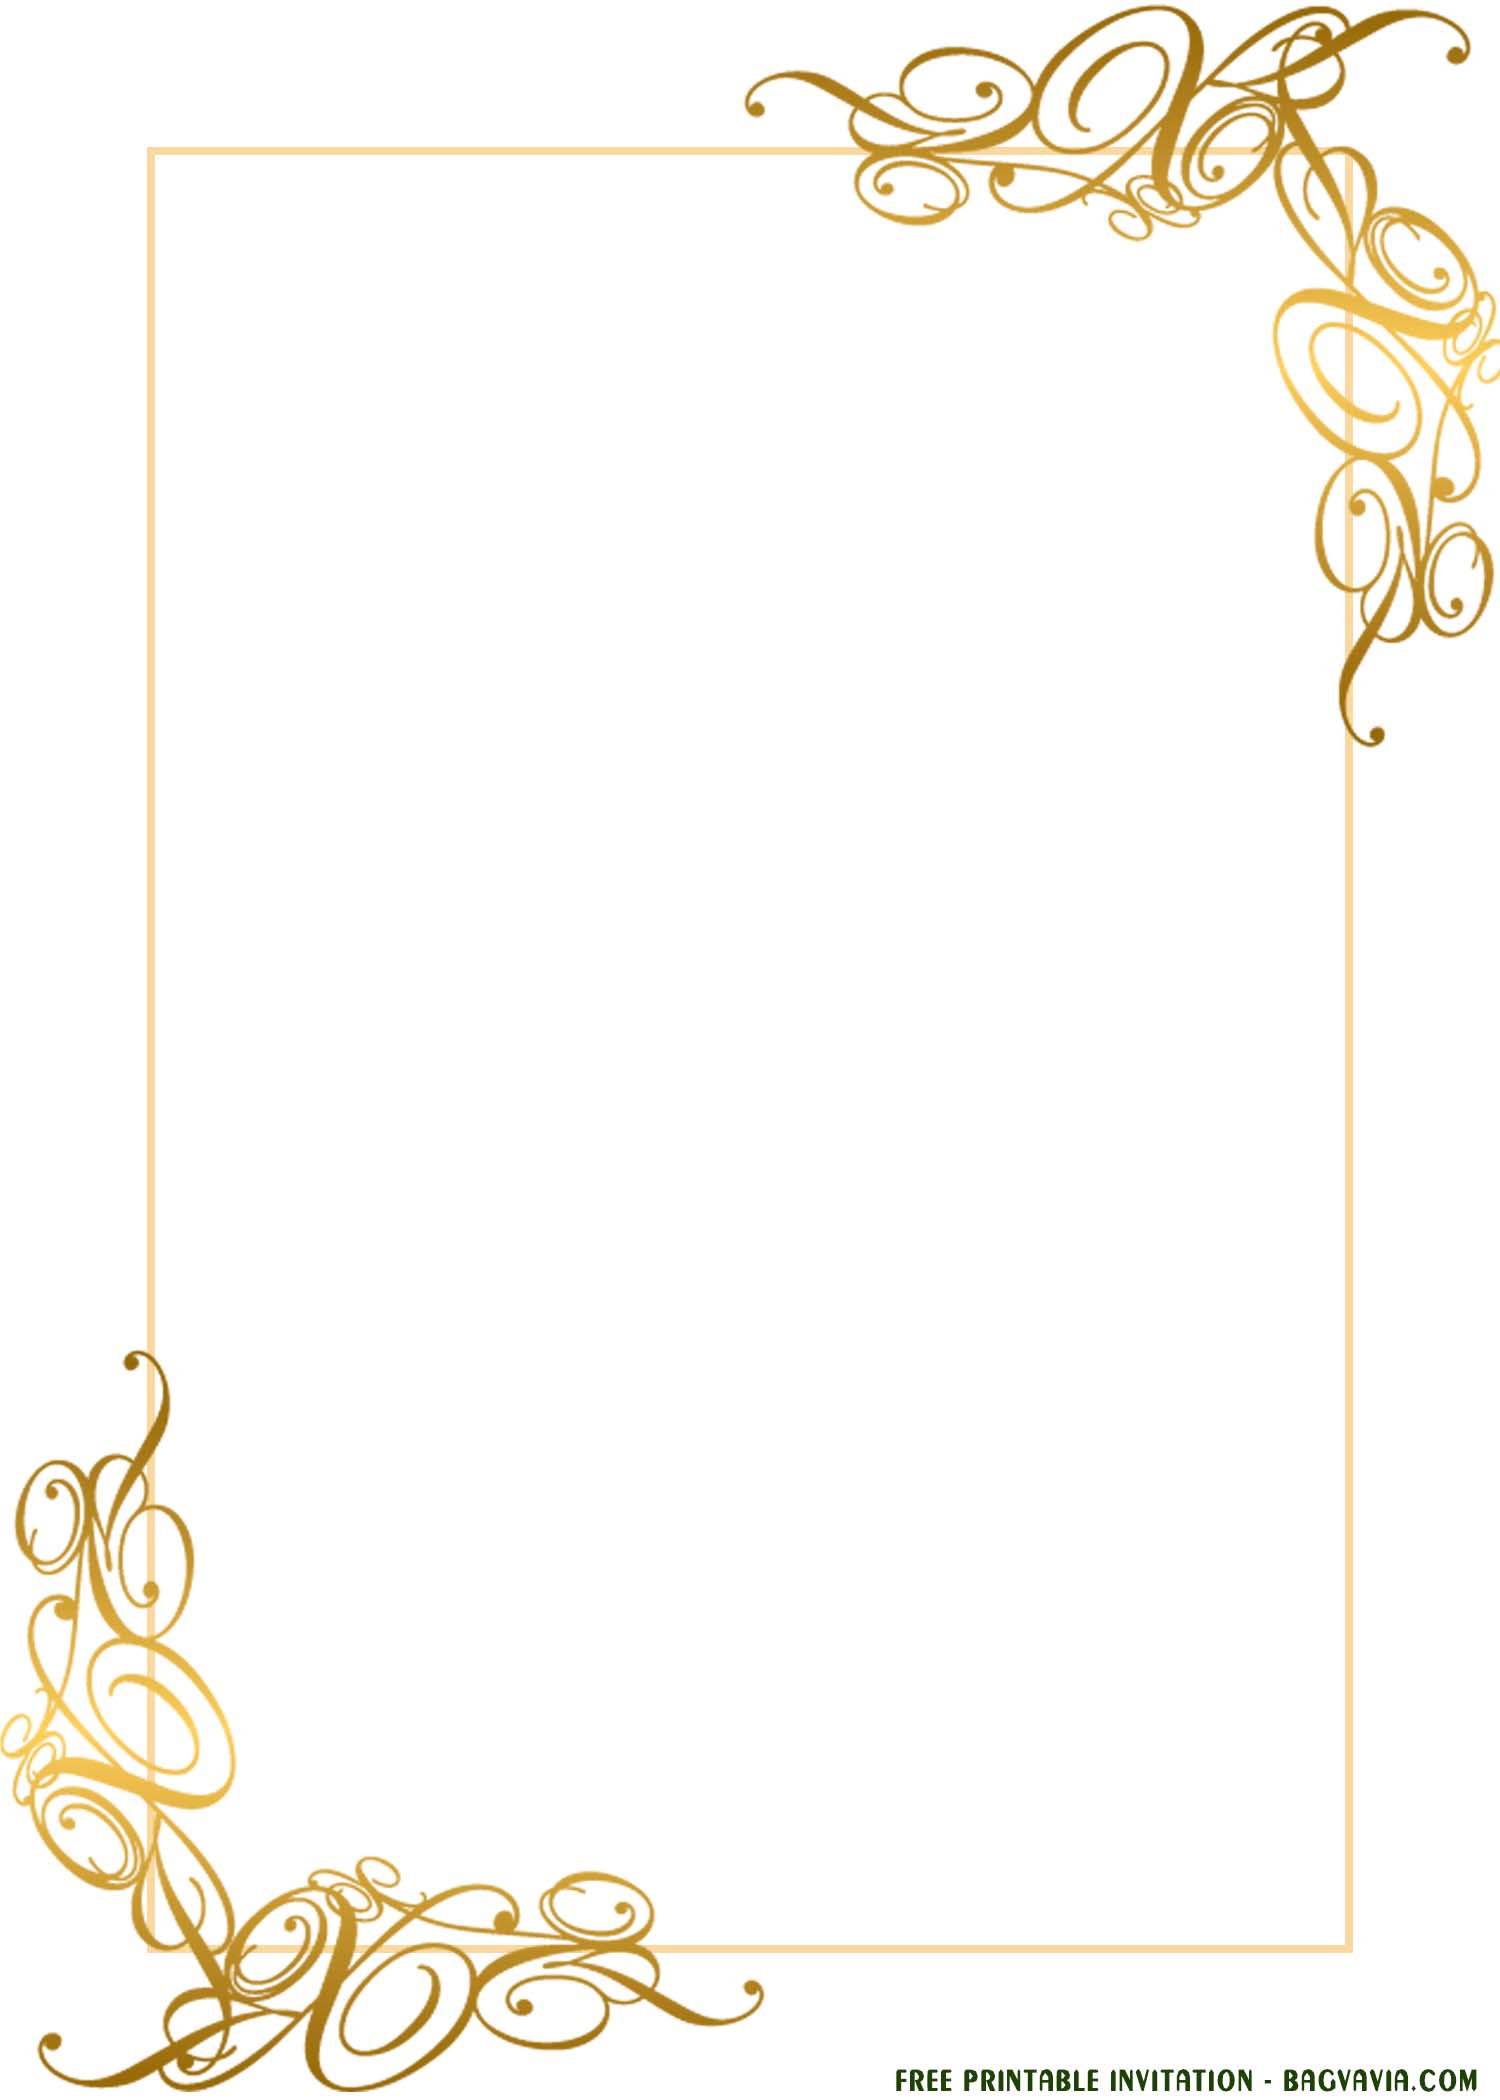 (FREE Printable) Gold Lace Invitation Templates For Any Occasions